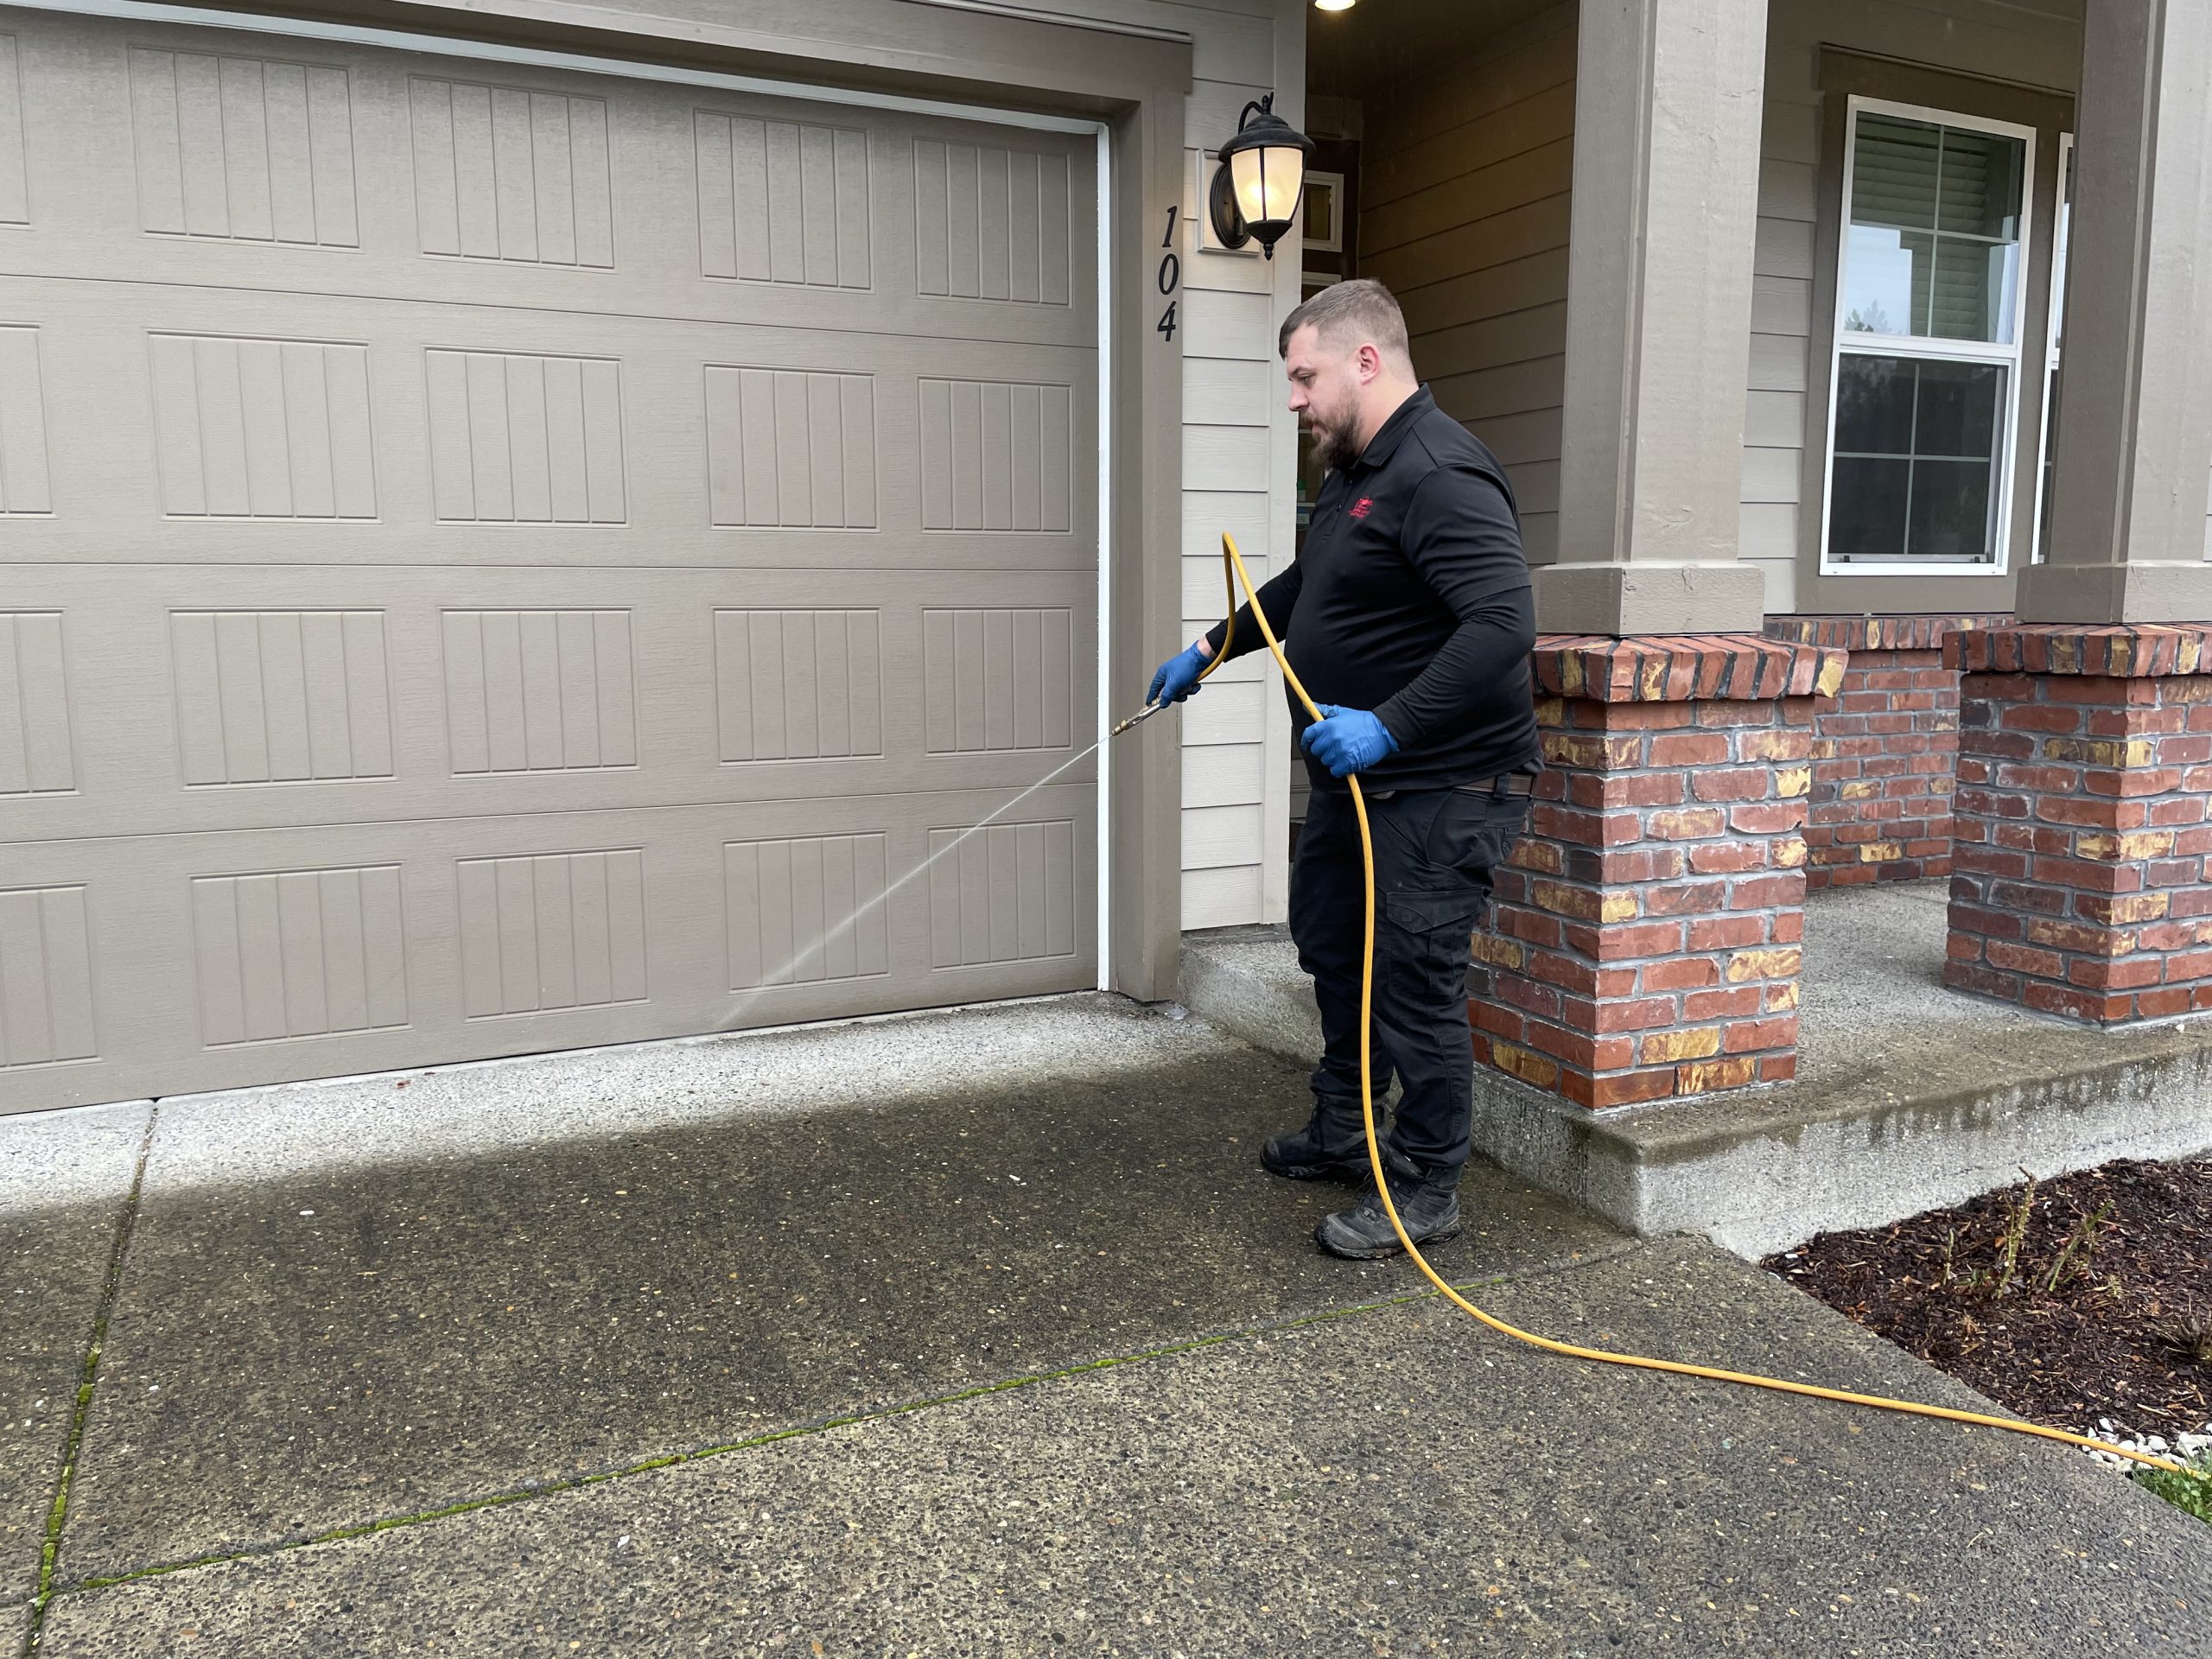 outside ant deterrent process - Antworks Pest Control in Portland OR & Vancouver WA